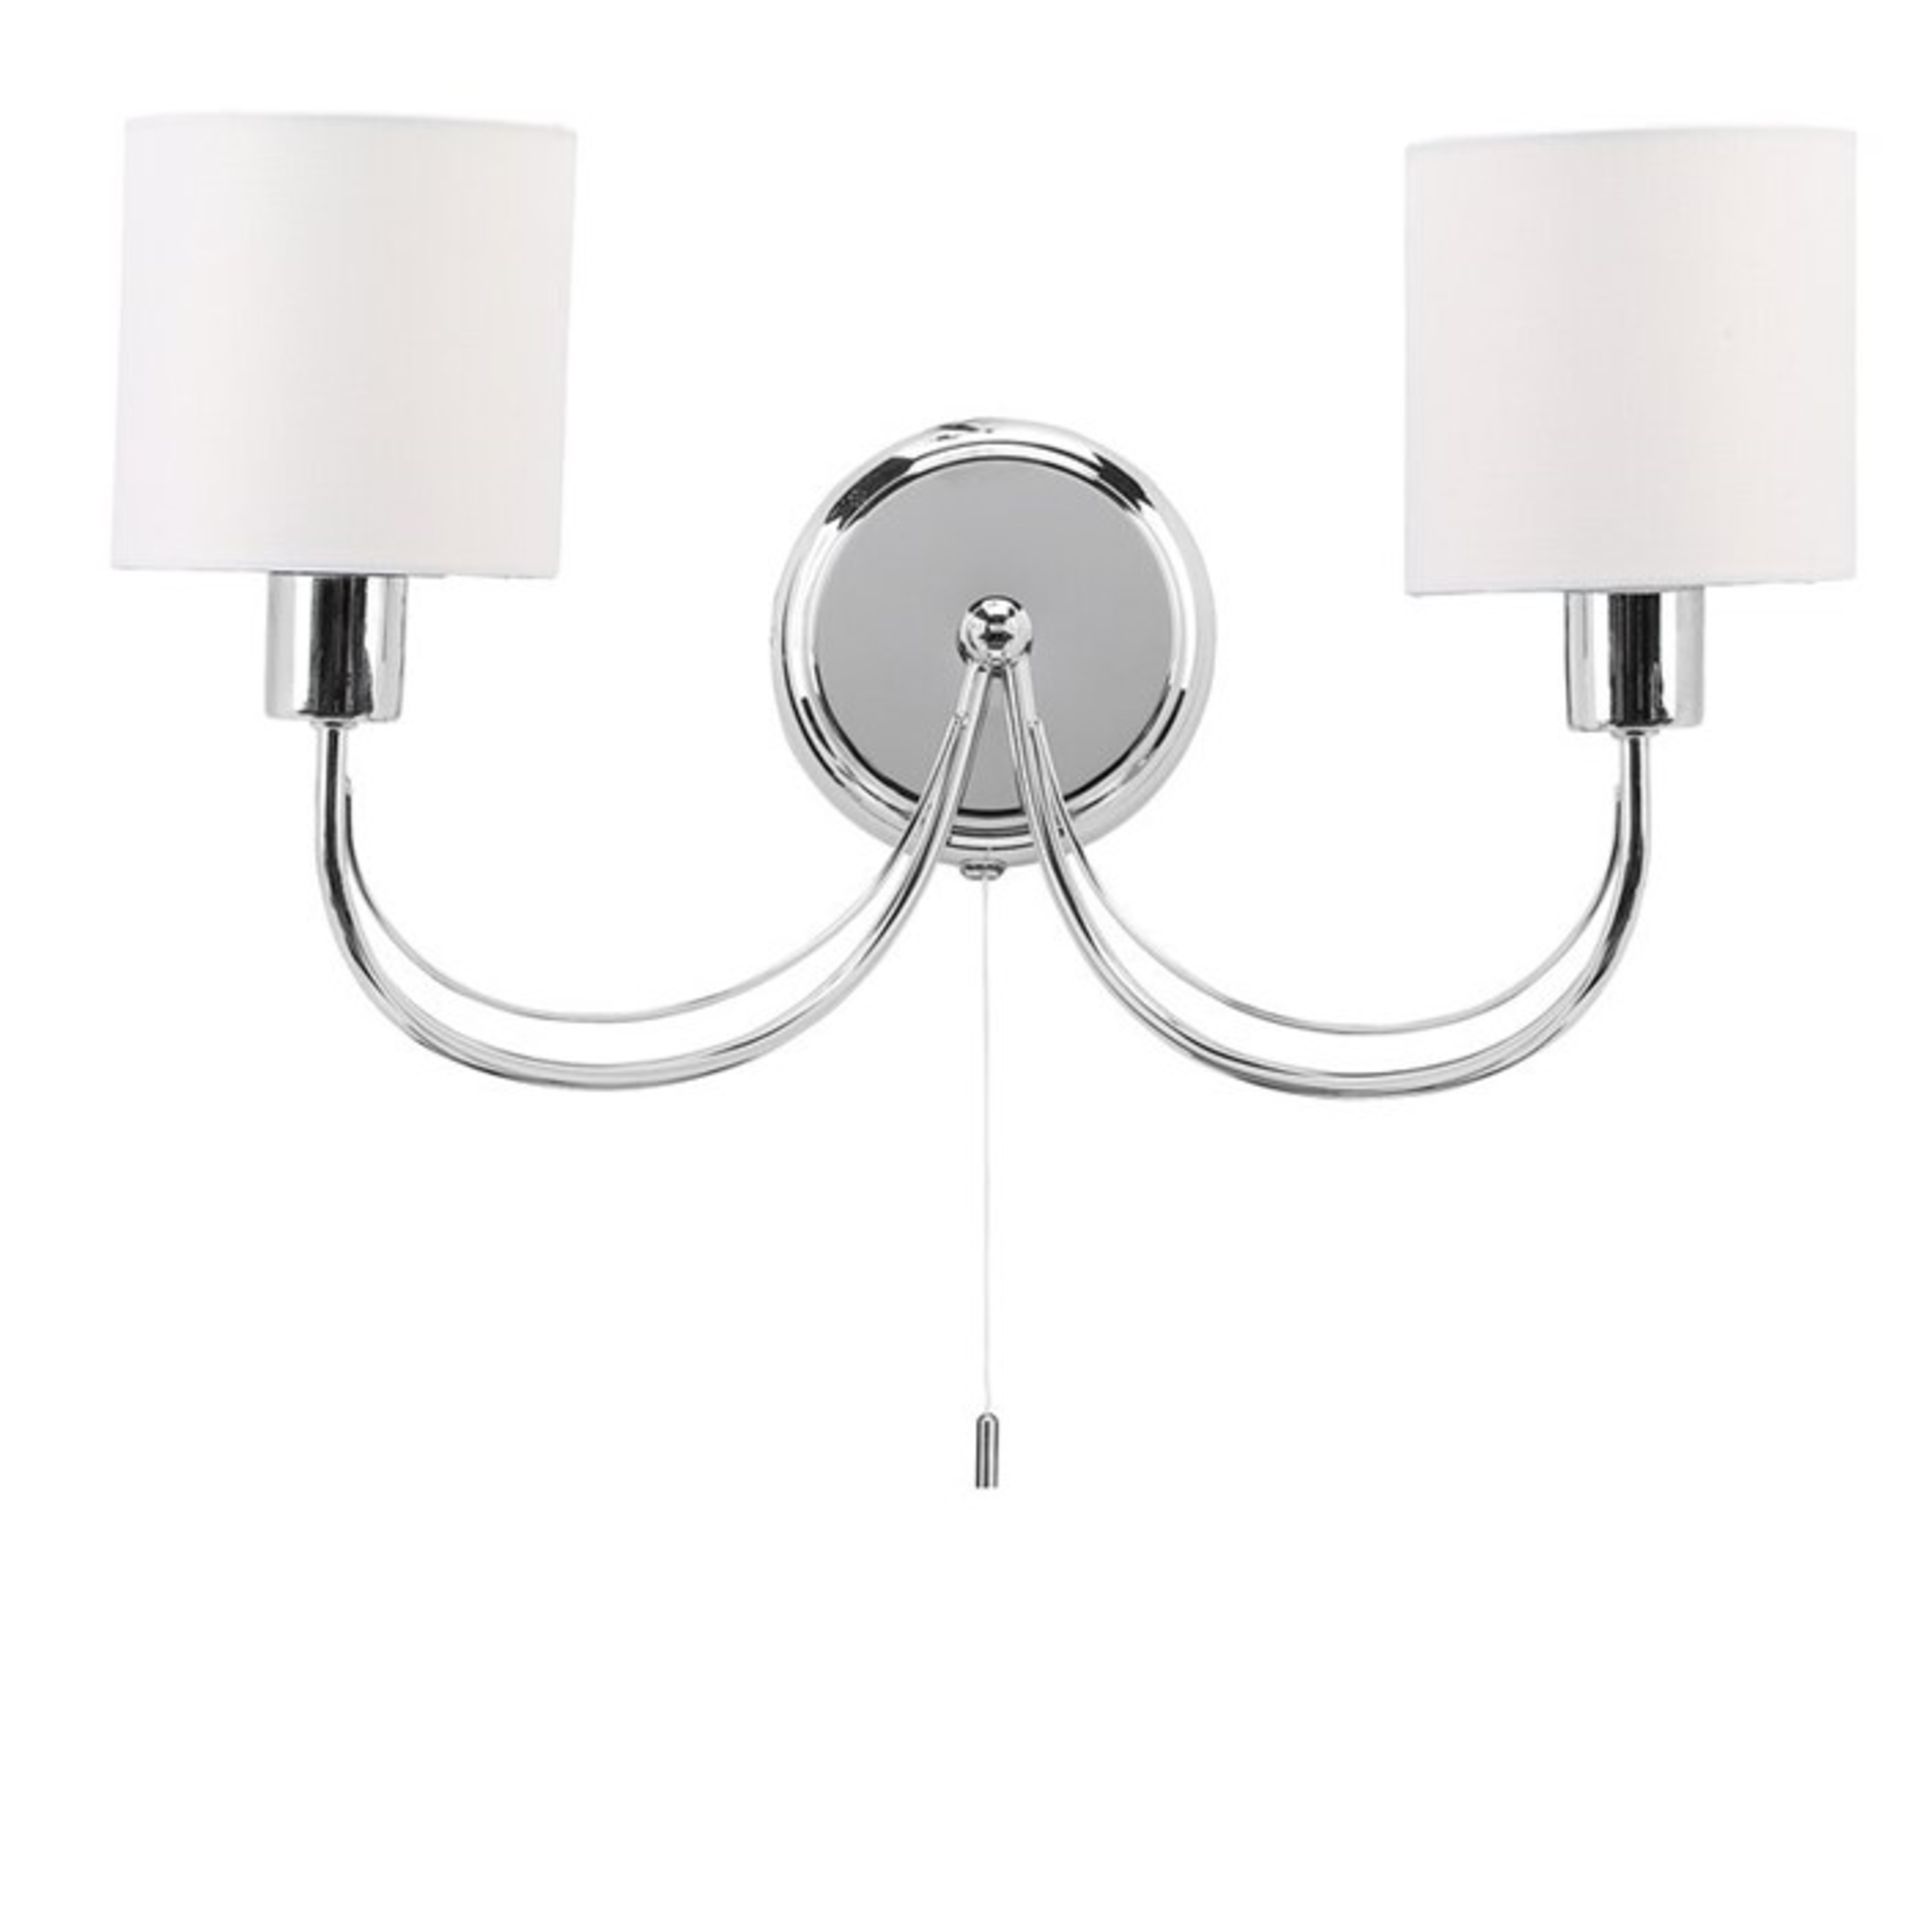 Marlow Home Co., Sigourney 2-Light Armed Sconce - RRP £43.99 (UEL3120 - 18610/1) 7D